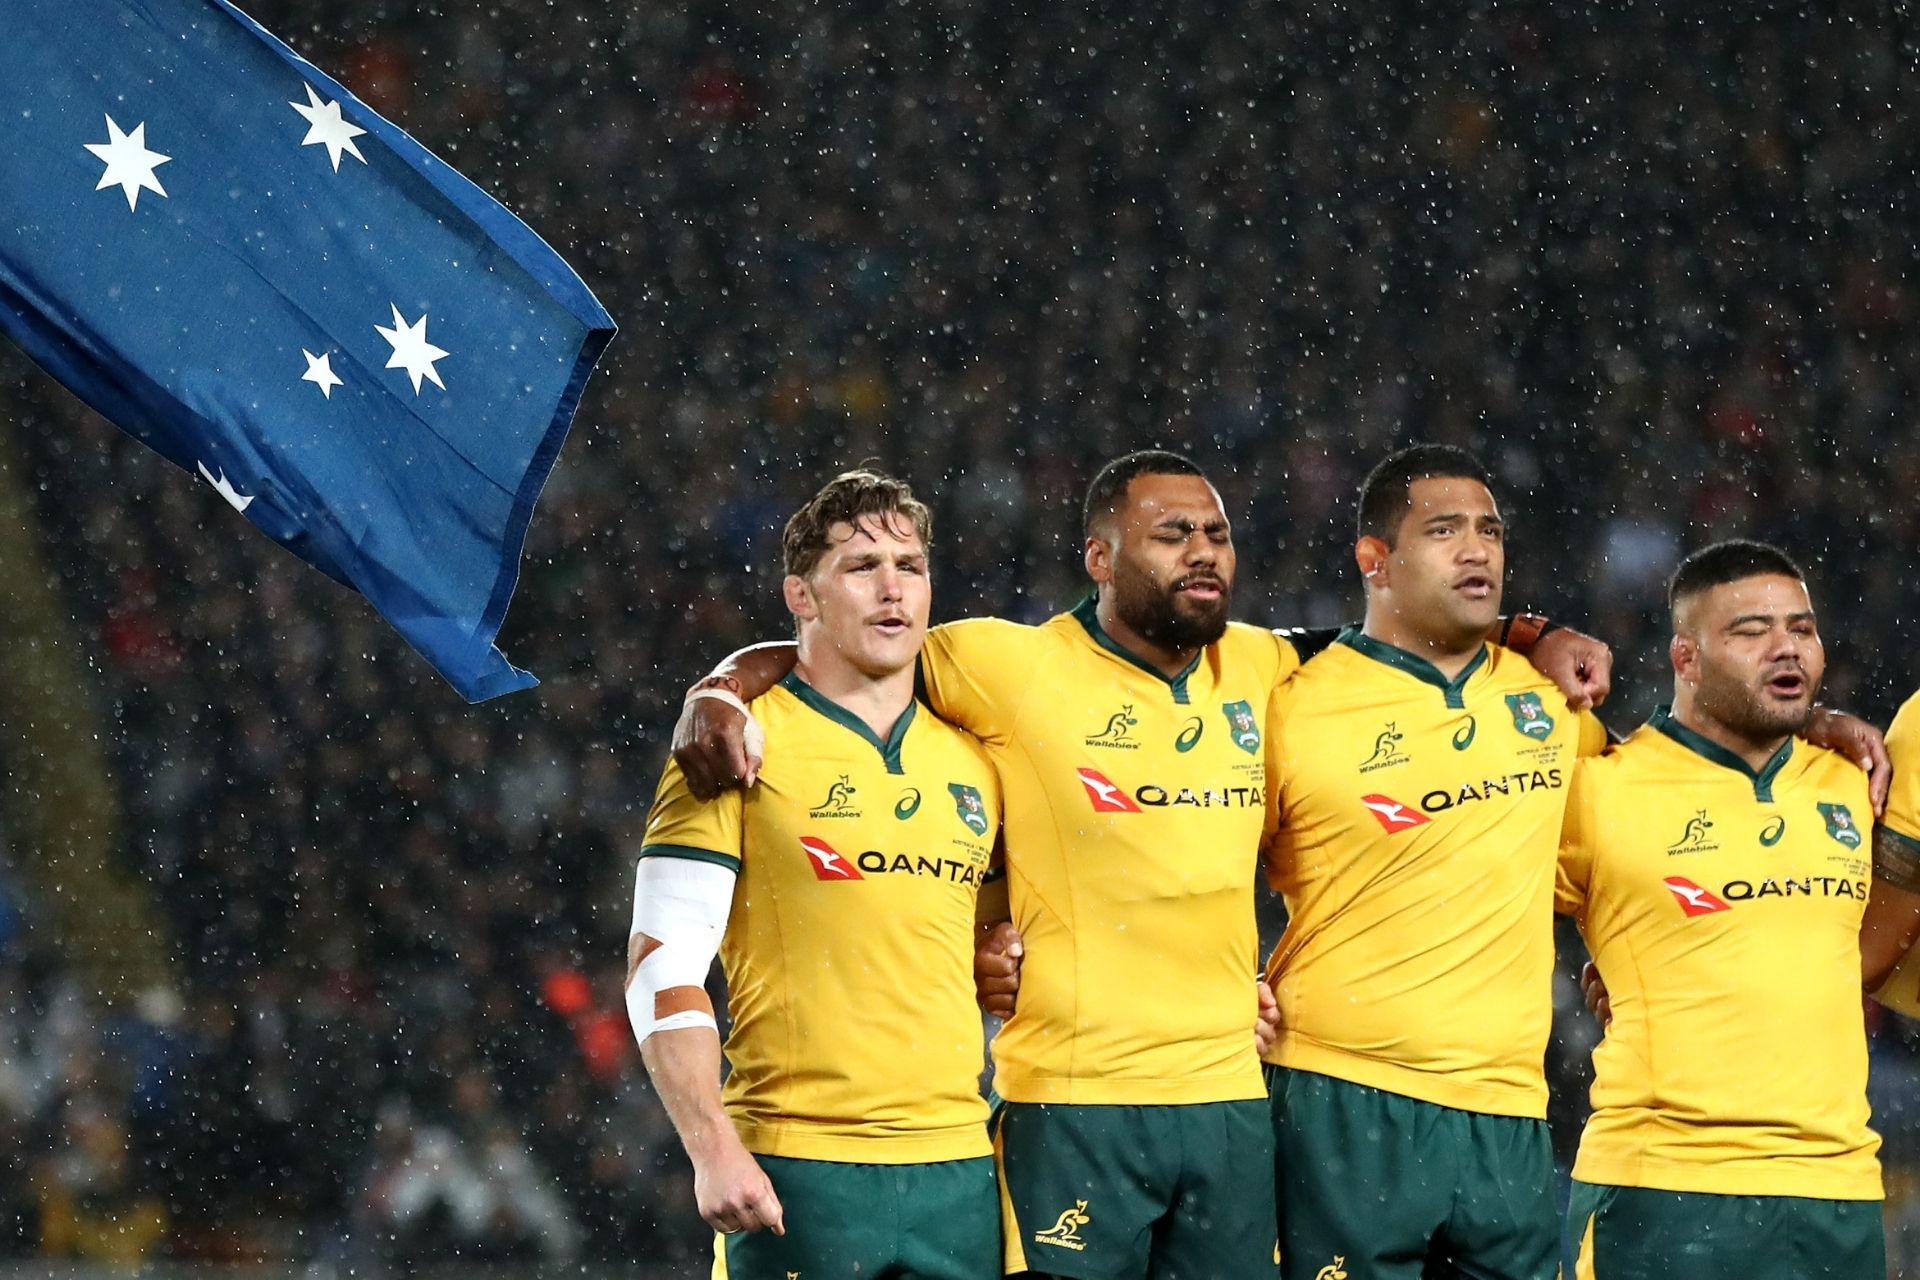 Australia's National Rugby Team just stuck it to Black Lives Matter